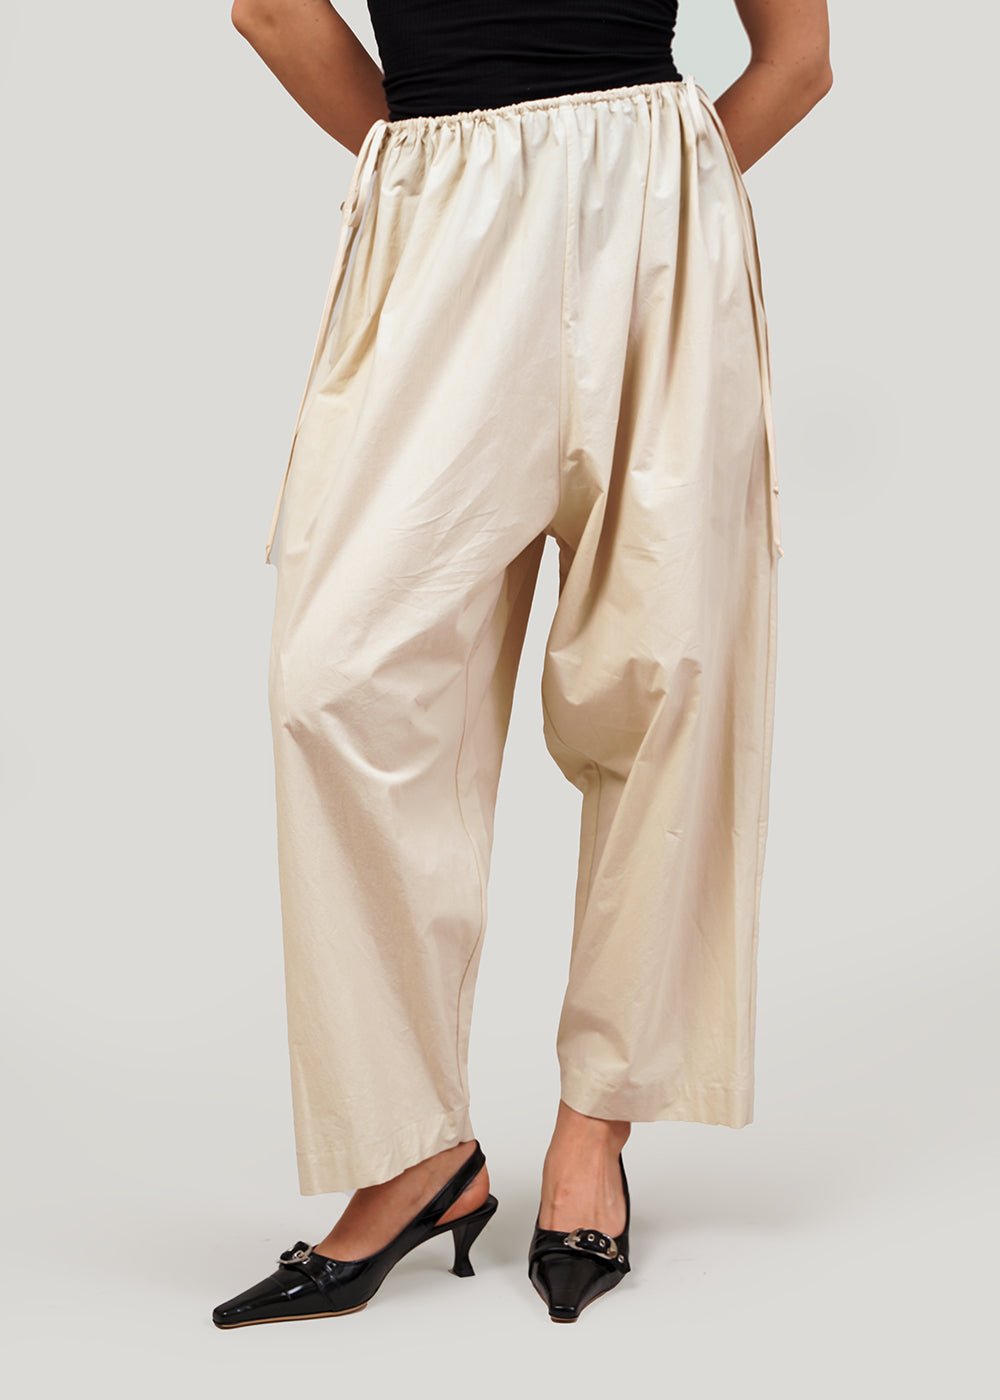 Balloon Pant in Parchment by MODERN WEAVING – New Classics Studios